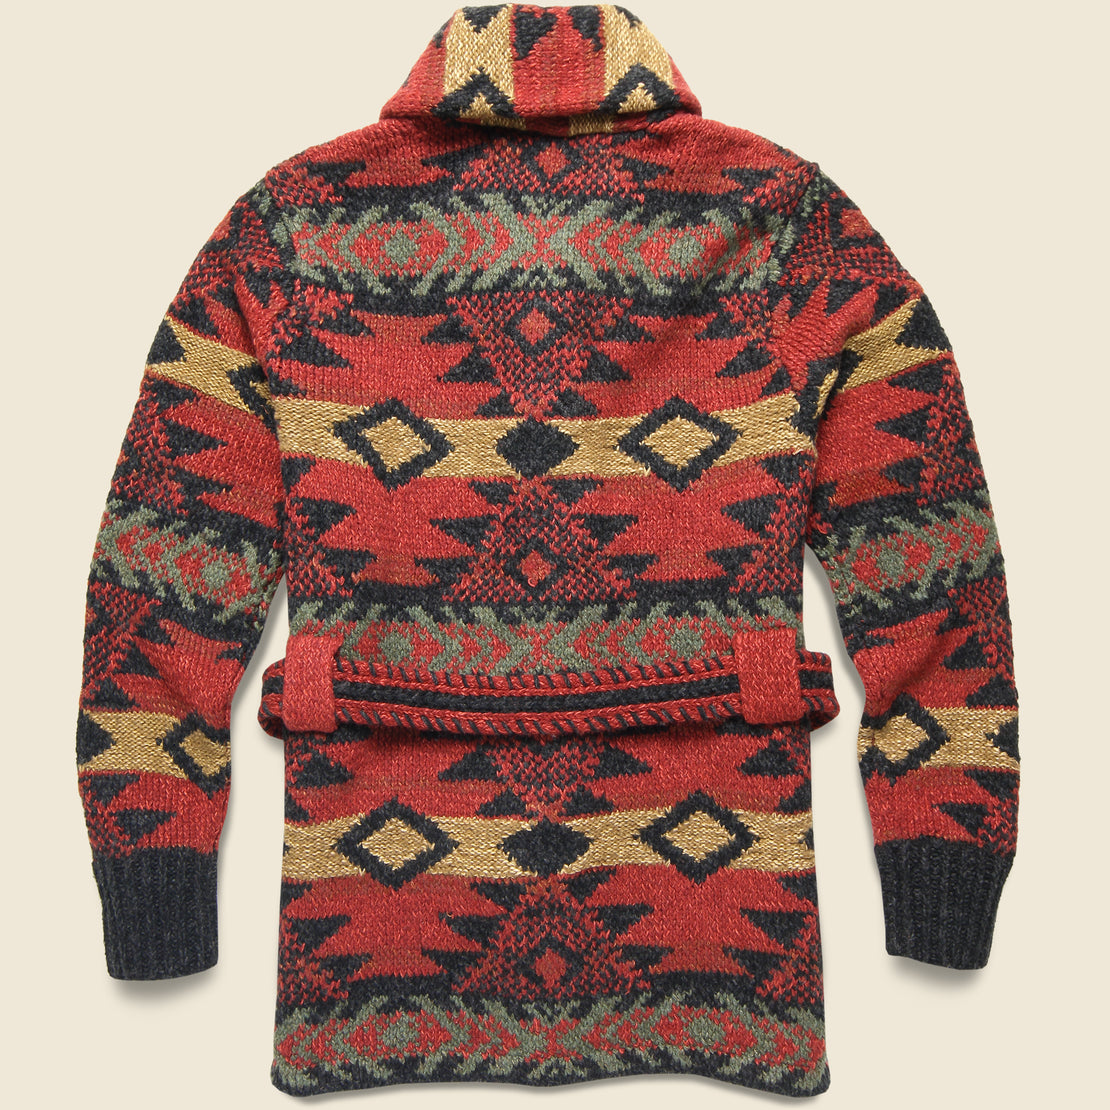 Hand-Knit Ranch Cardigan - Red Multi - RRL - STAG Provisions - Tops - Sweater